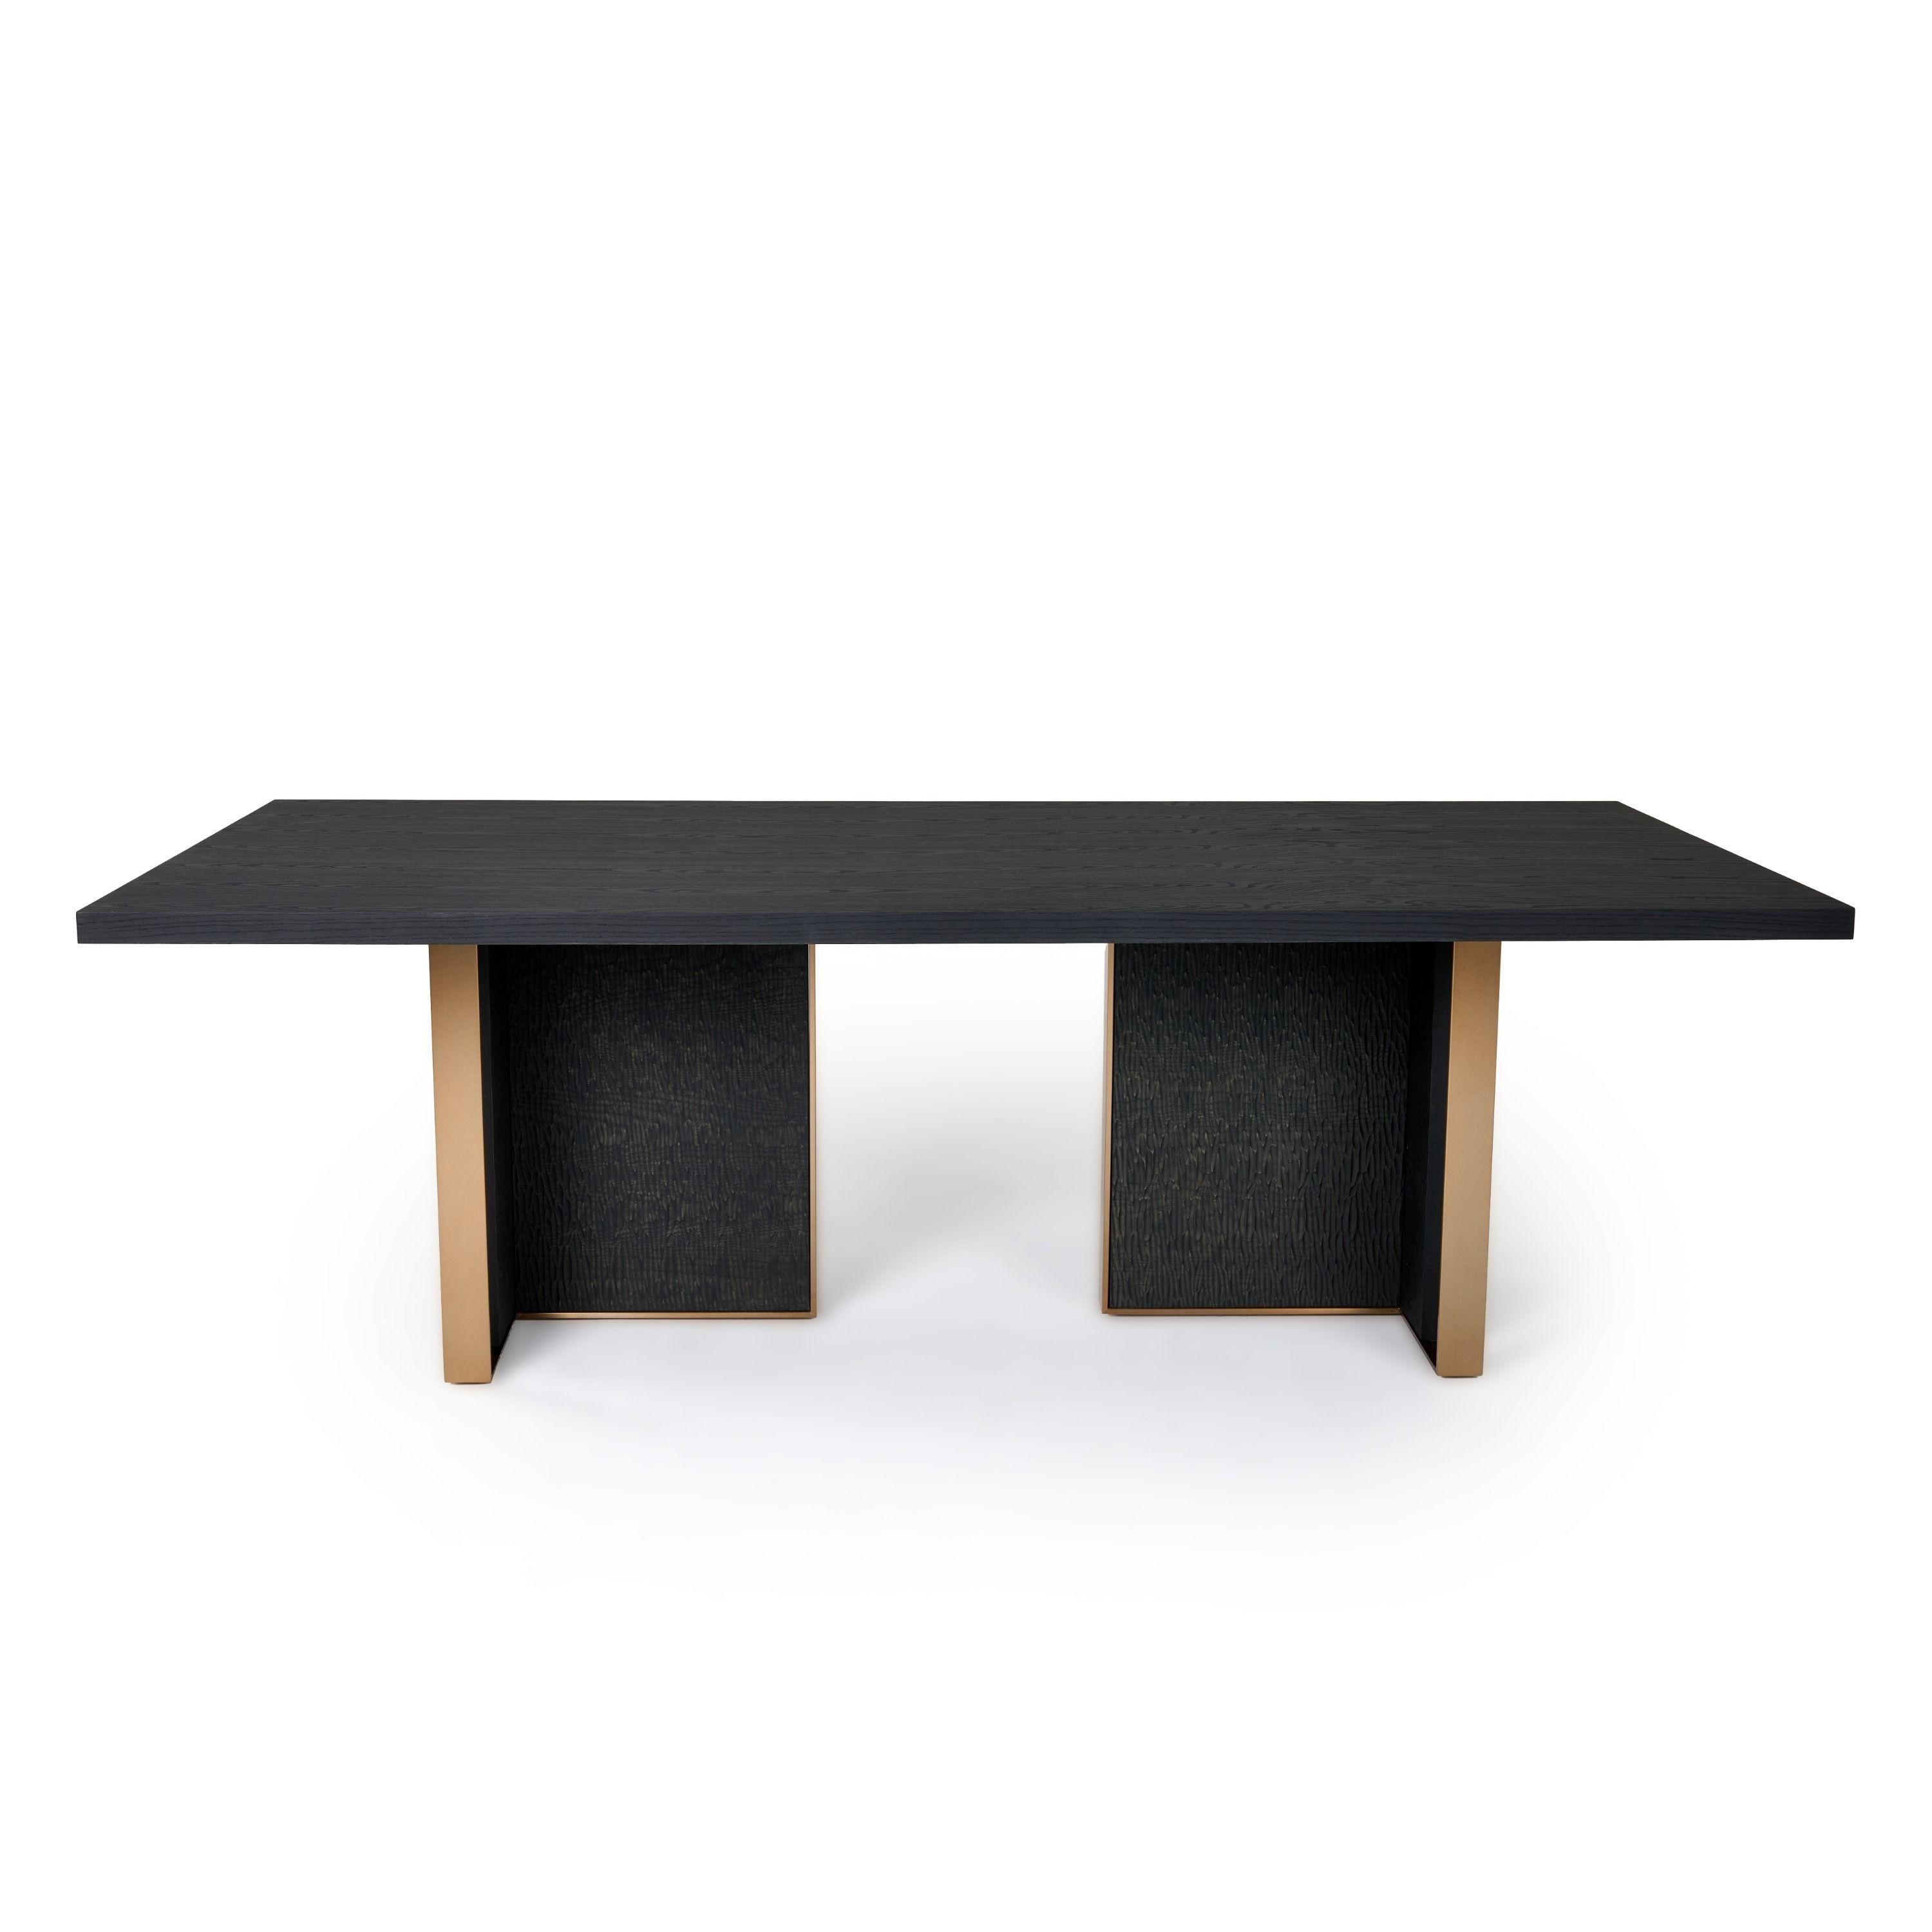 Contemporary Dining Table Modrest Tasha Dining Table VGVCT2308 VGVCT2308 in Gold, Black 